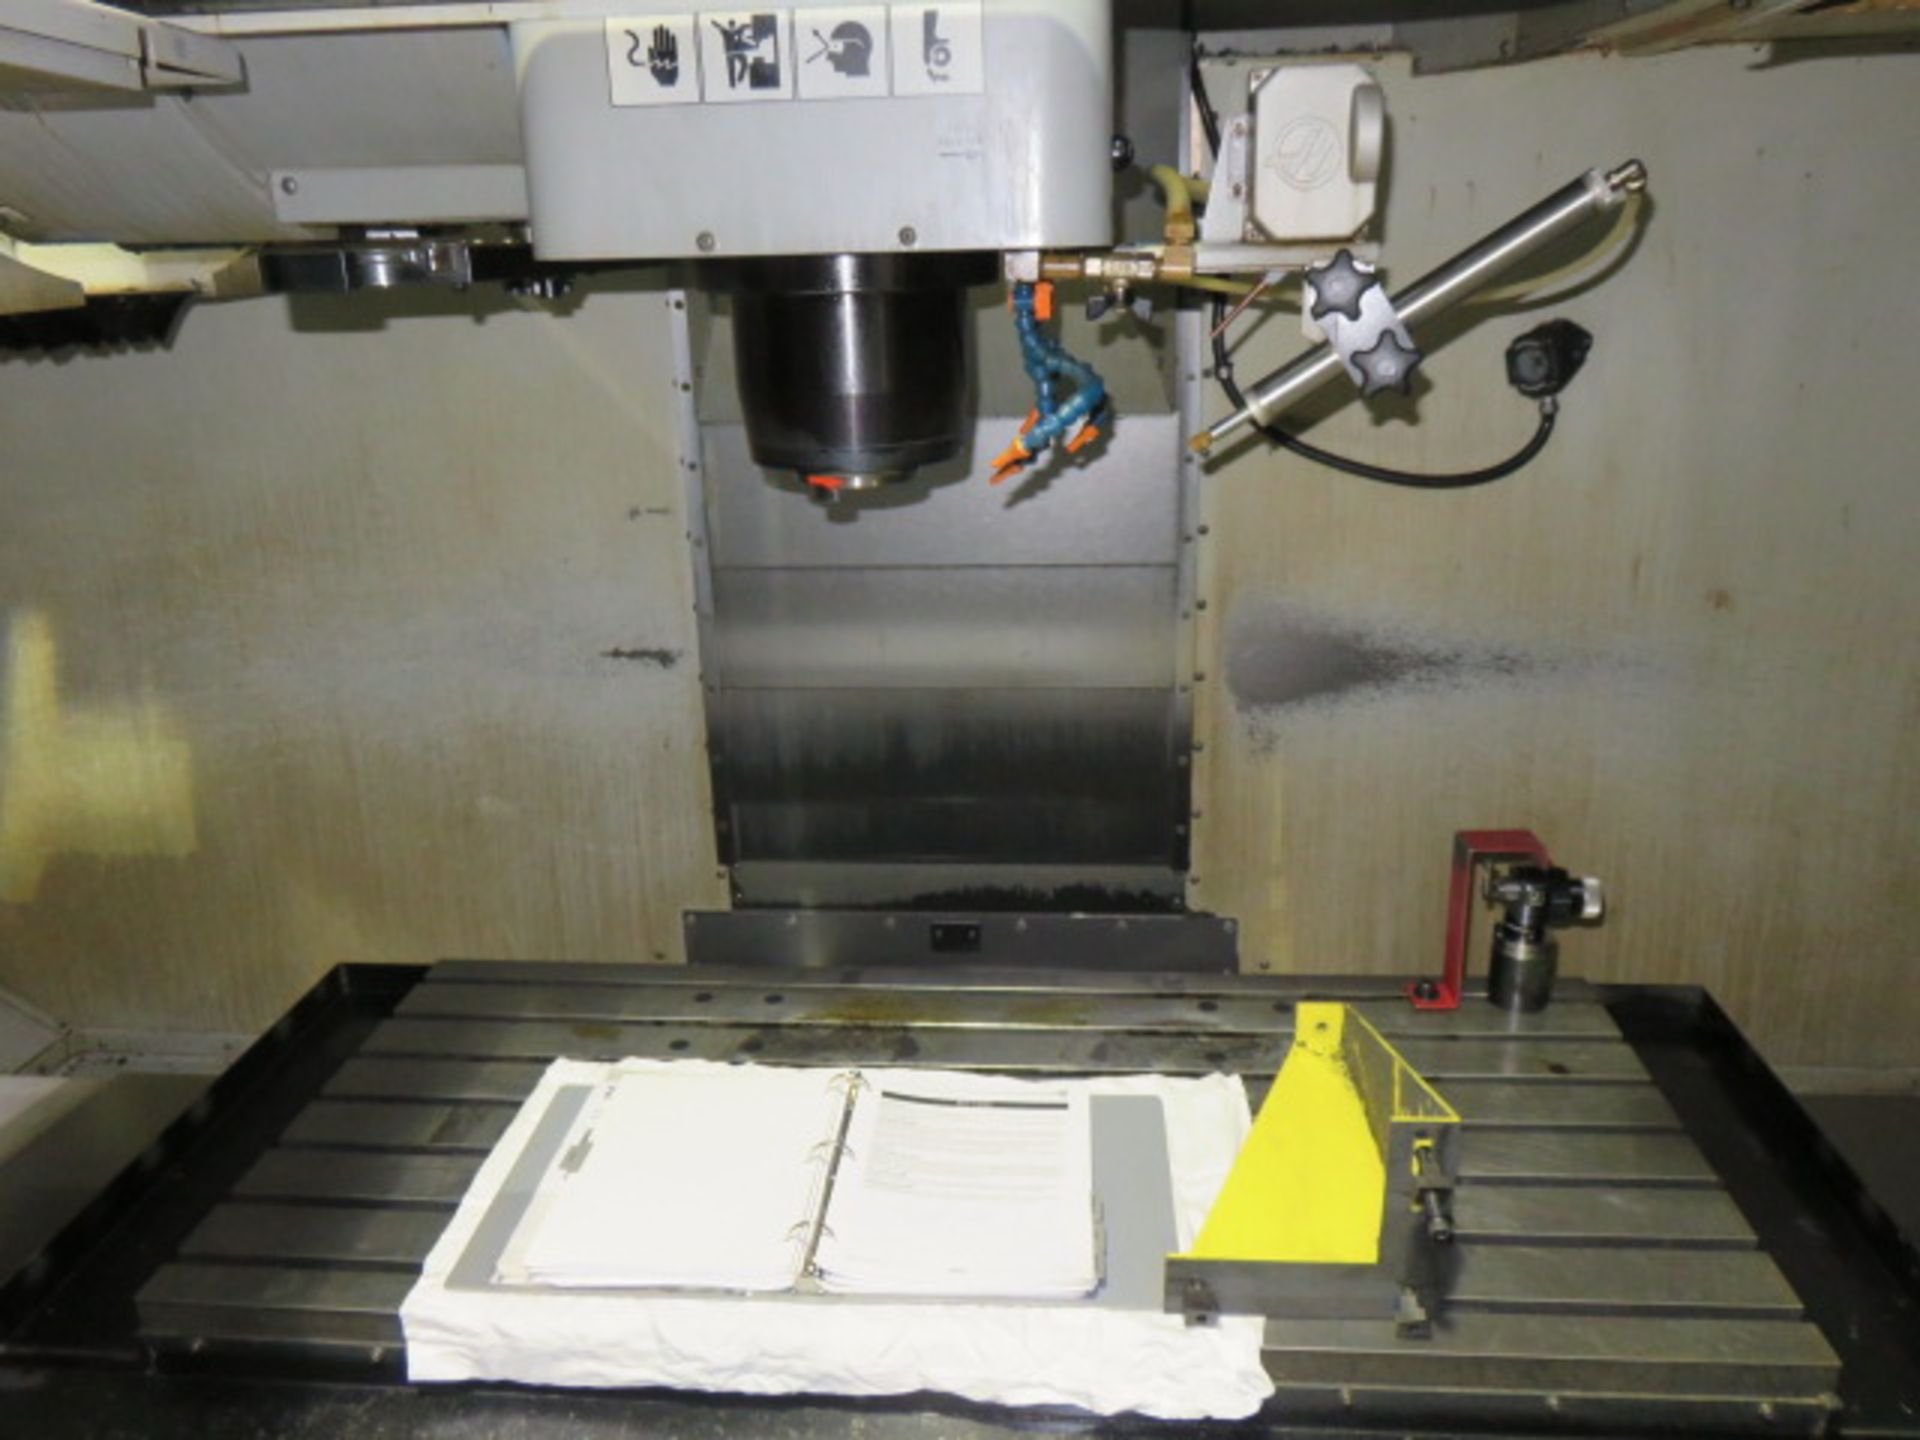 2007 HAAS VF-5/50 CNC VERTICAL MACHINING CENTER, S/N 1062010, 12,618 HOURS, (NEW SPNDL. 2012) - Image 3 of 6